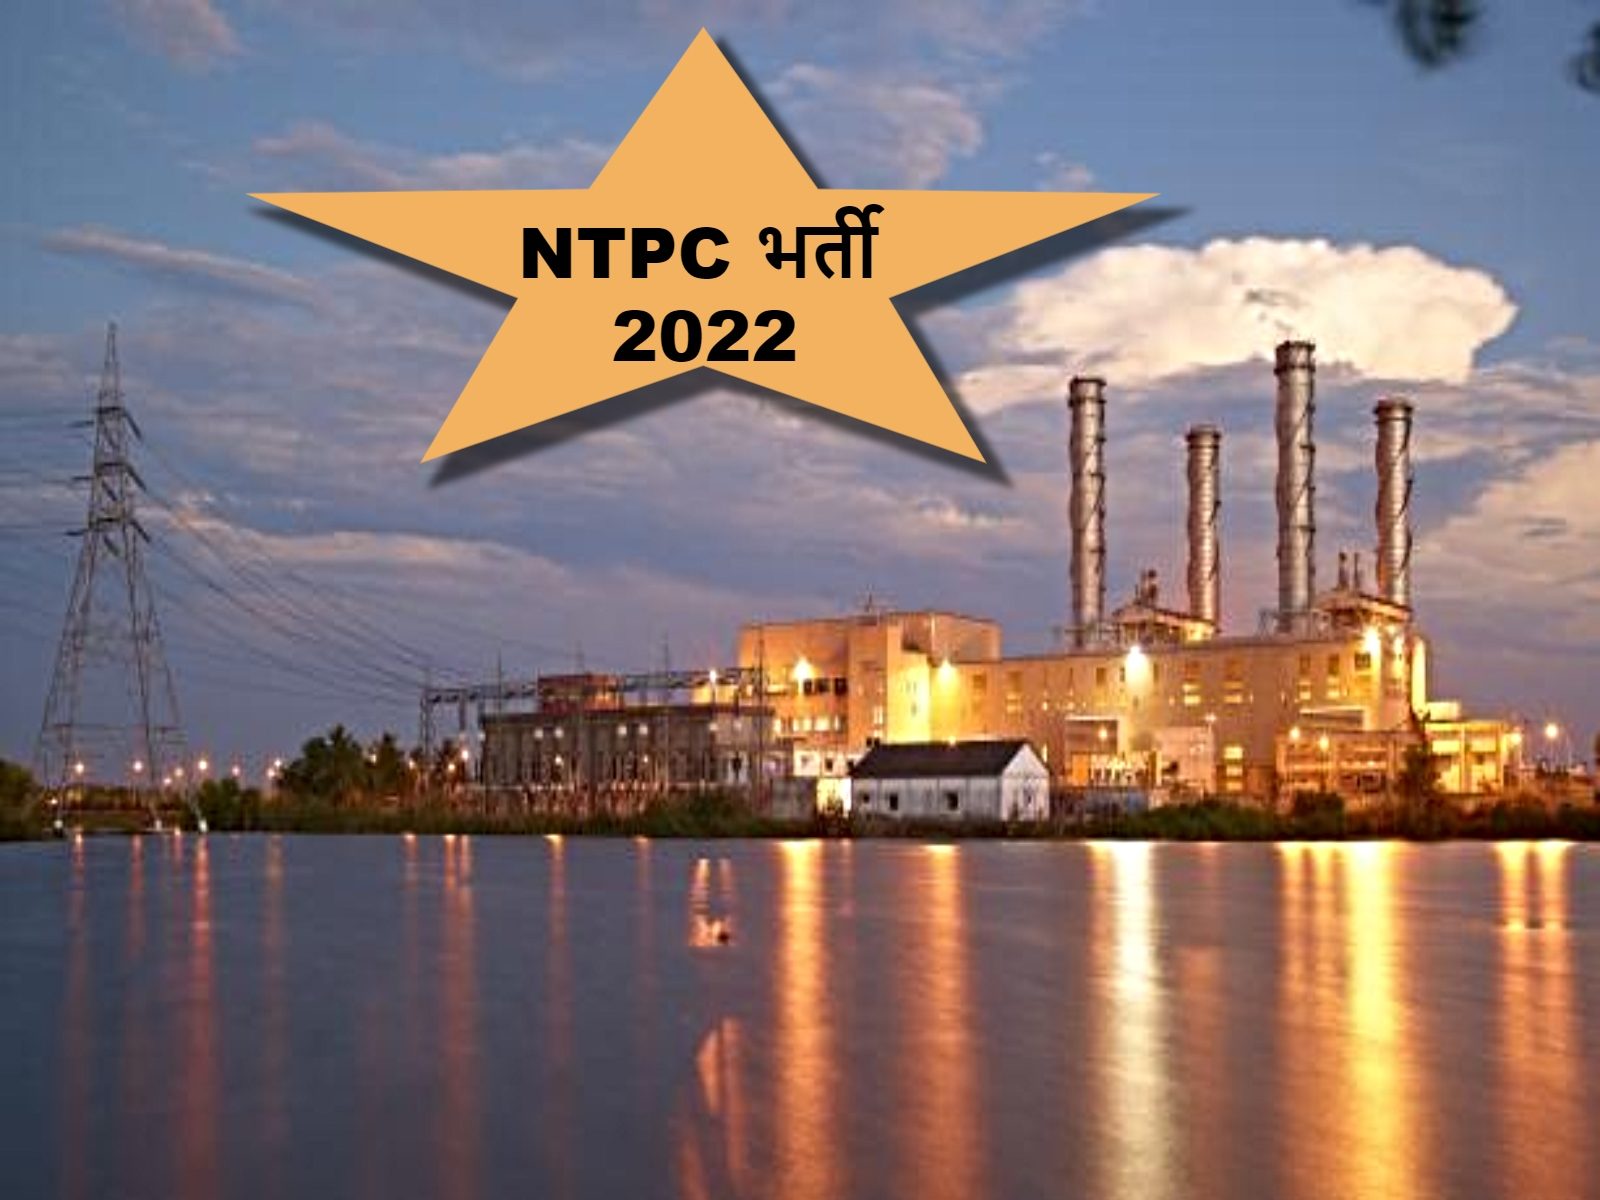 NTPC to acquire THDC  Neepco for Rs11500 crore  Mint